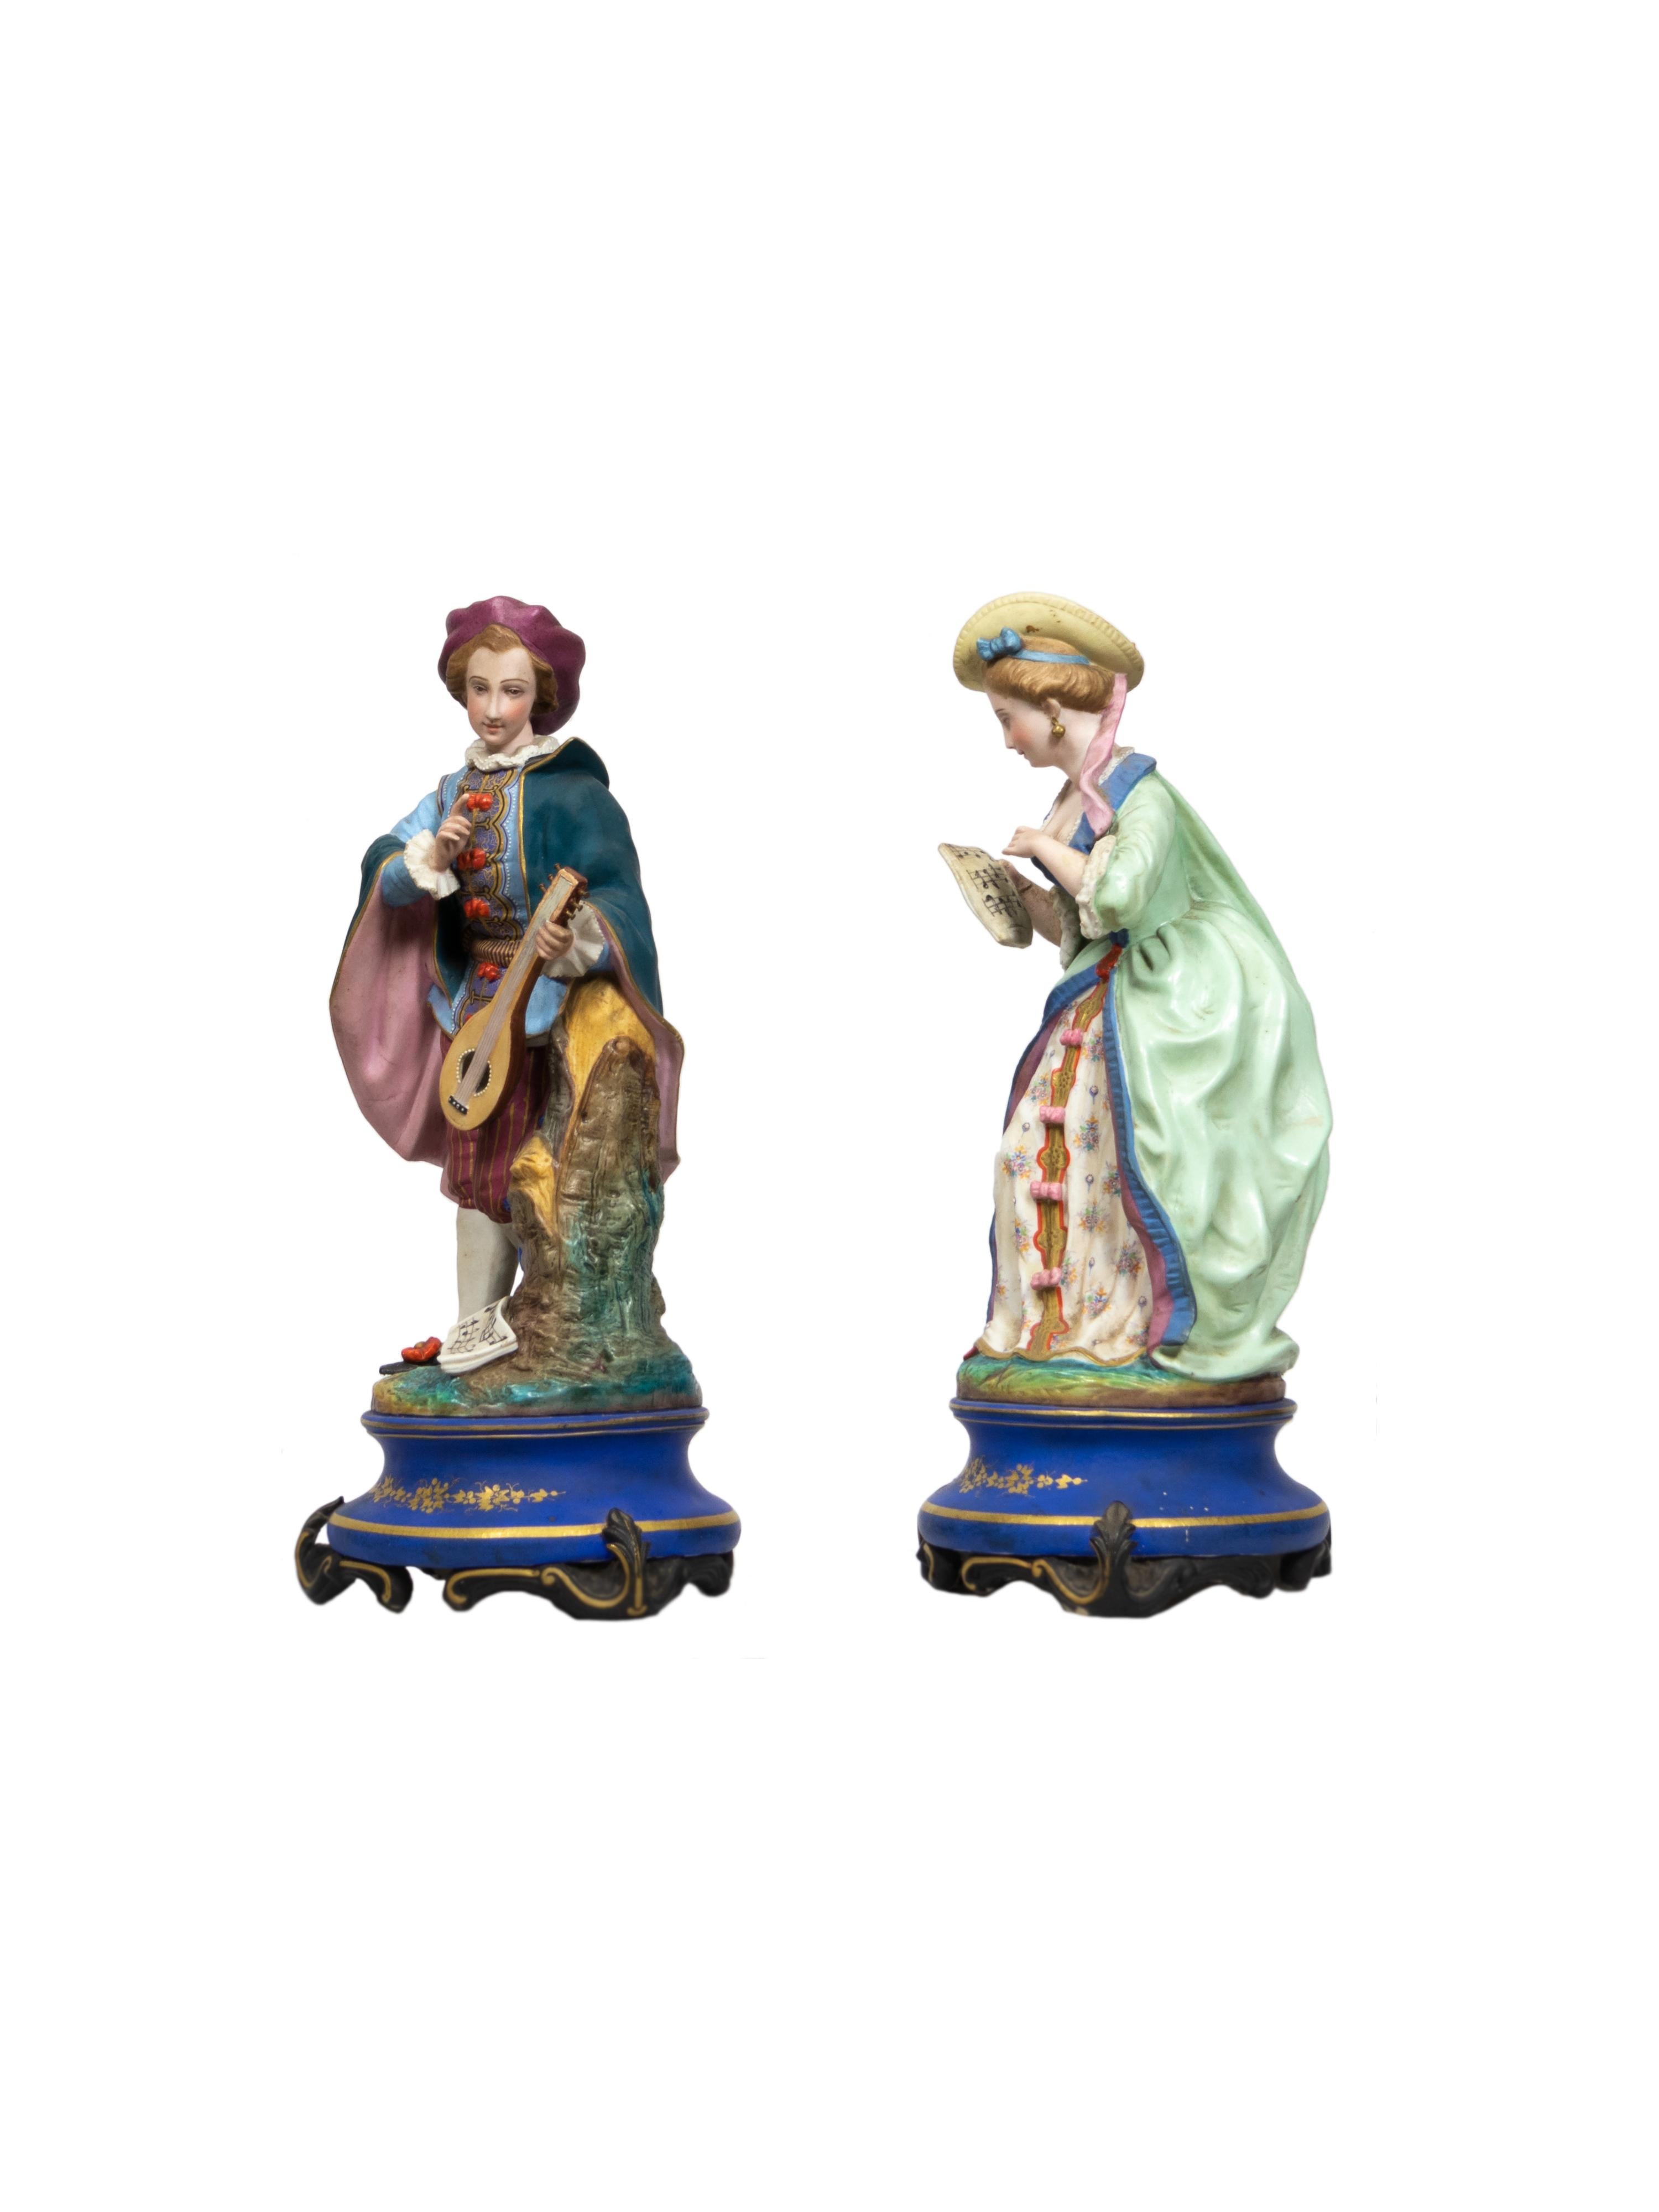 A large pair of French polychrome and gilt painted biscuit figurines of a mandolin player and a singer.
The woman is wearing a green sack-back gown with white flowery etched inner dressing and elegant side hat.
The man is dressed in Rococo style: